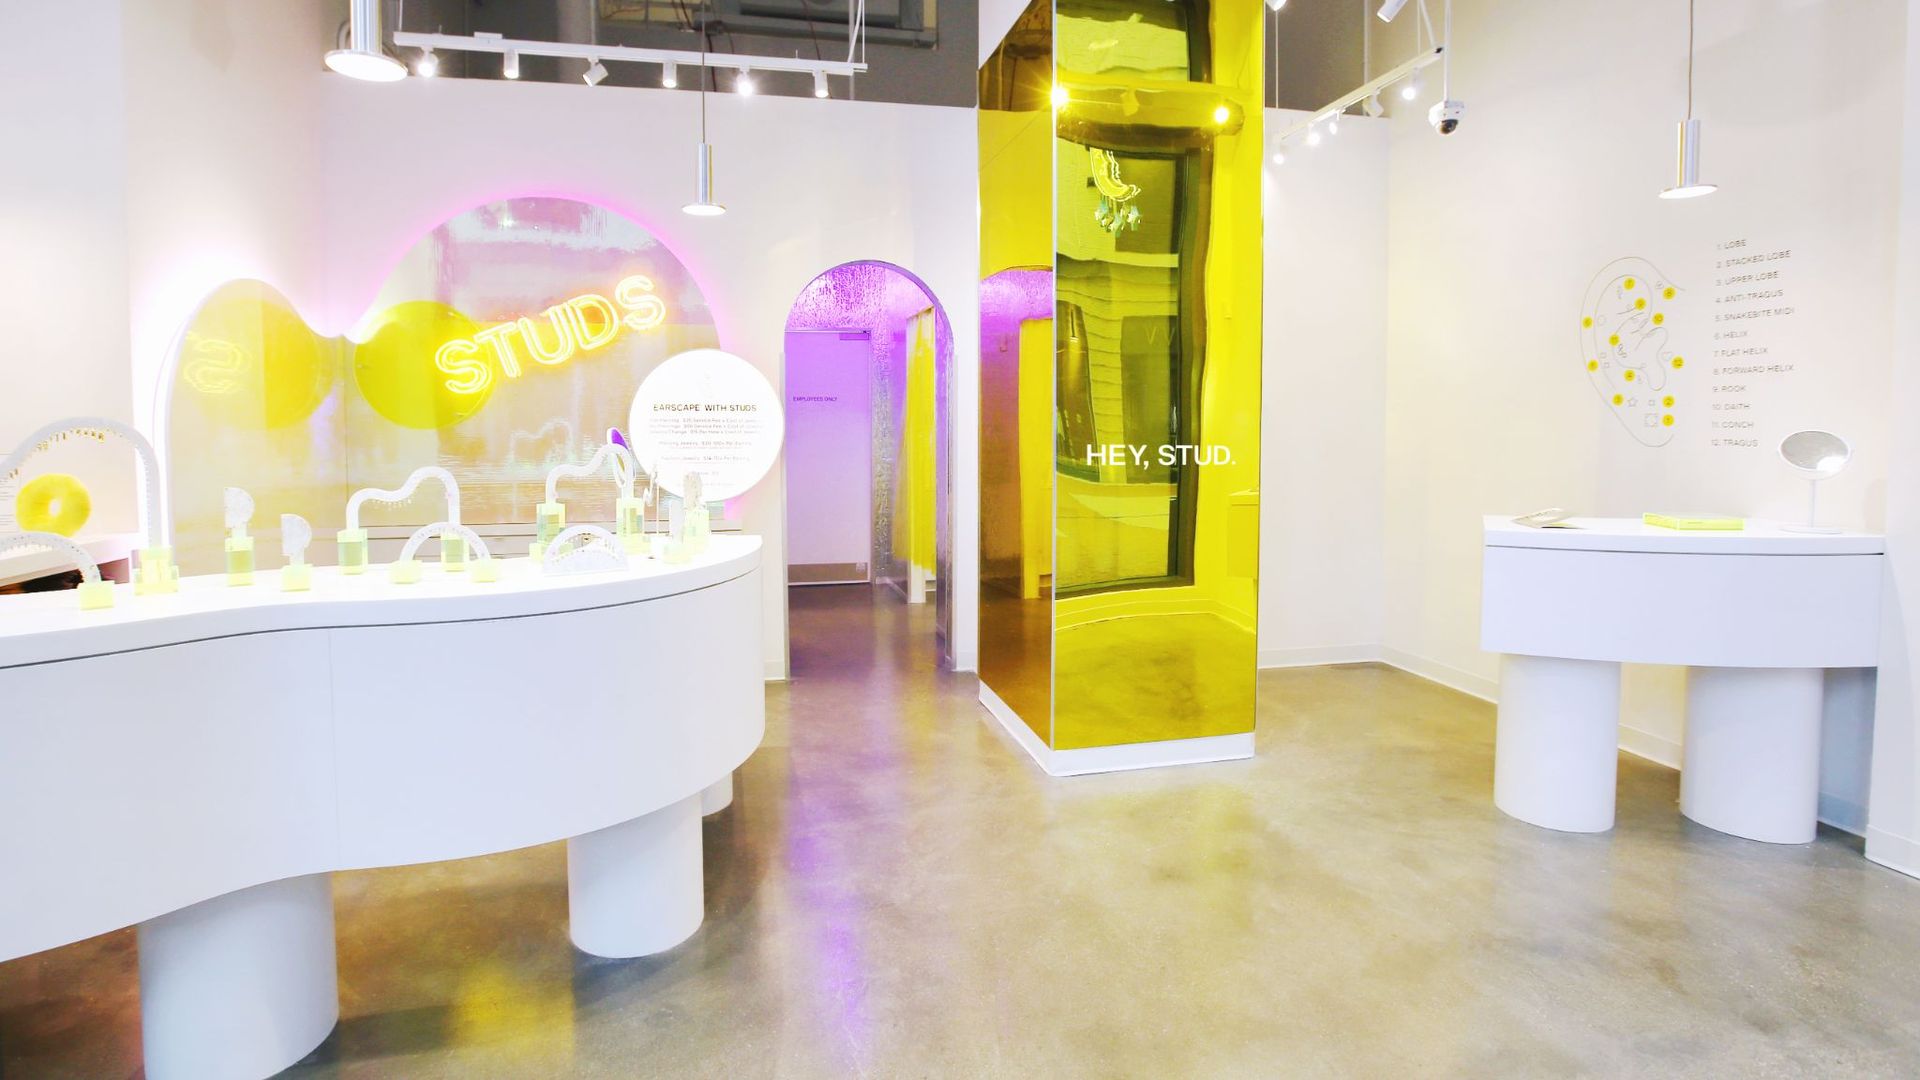 The white and yellow interior of a modern Studs jewelry studio